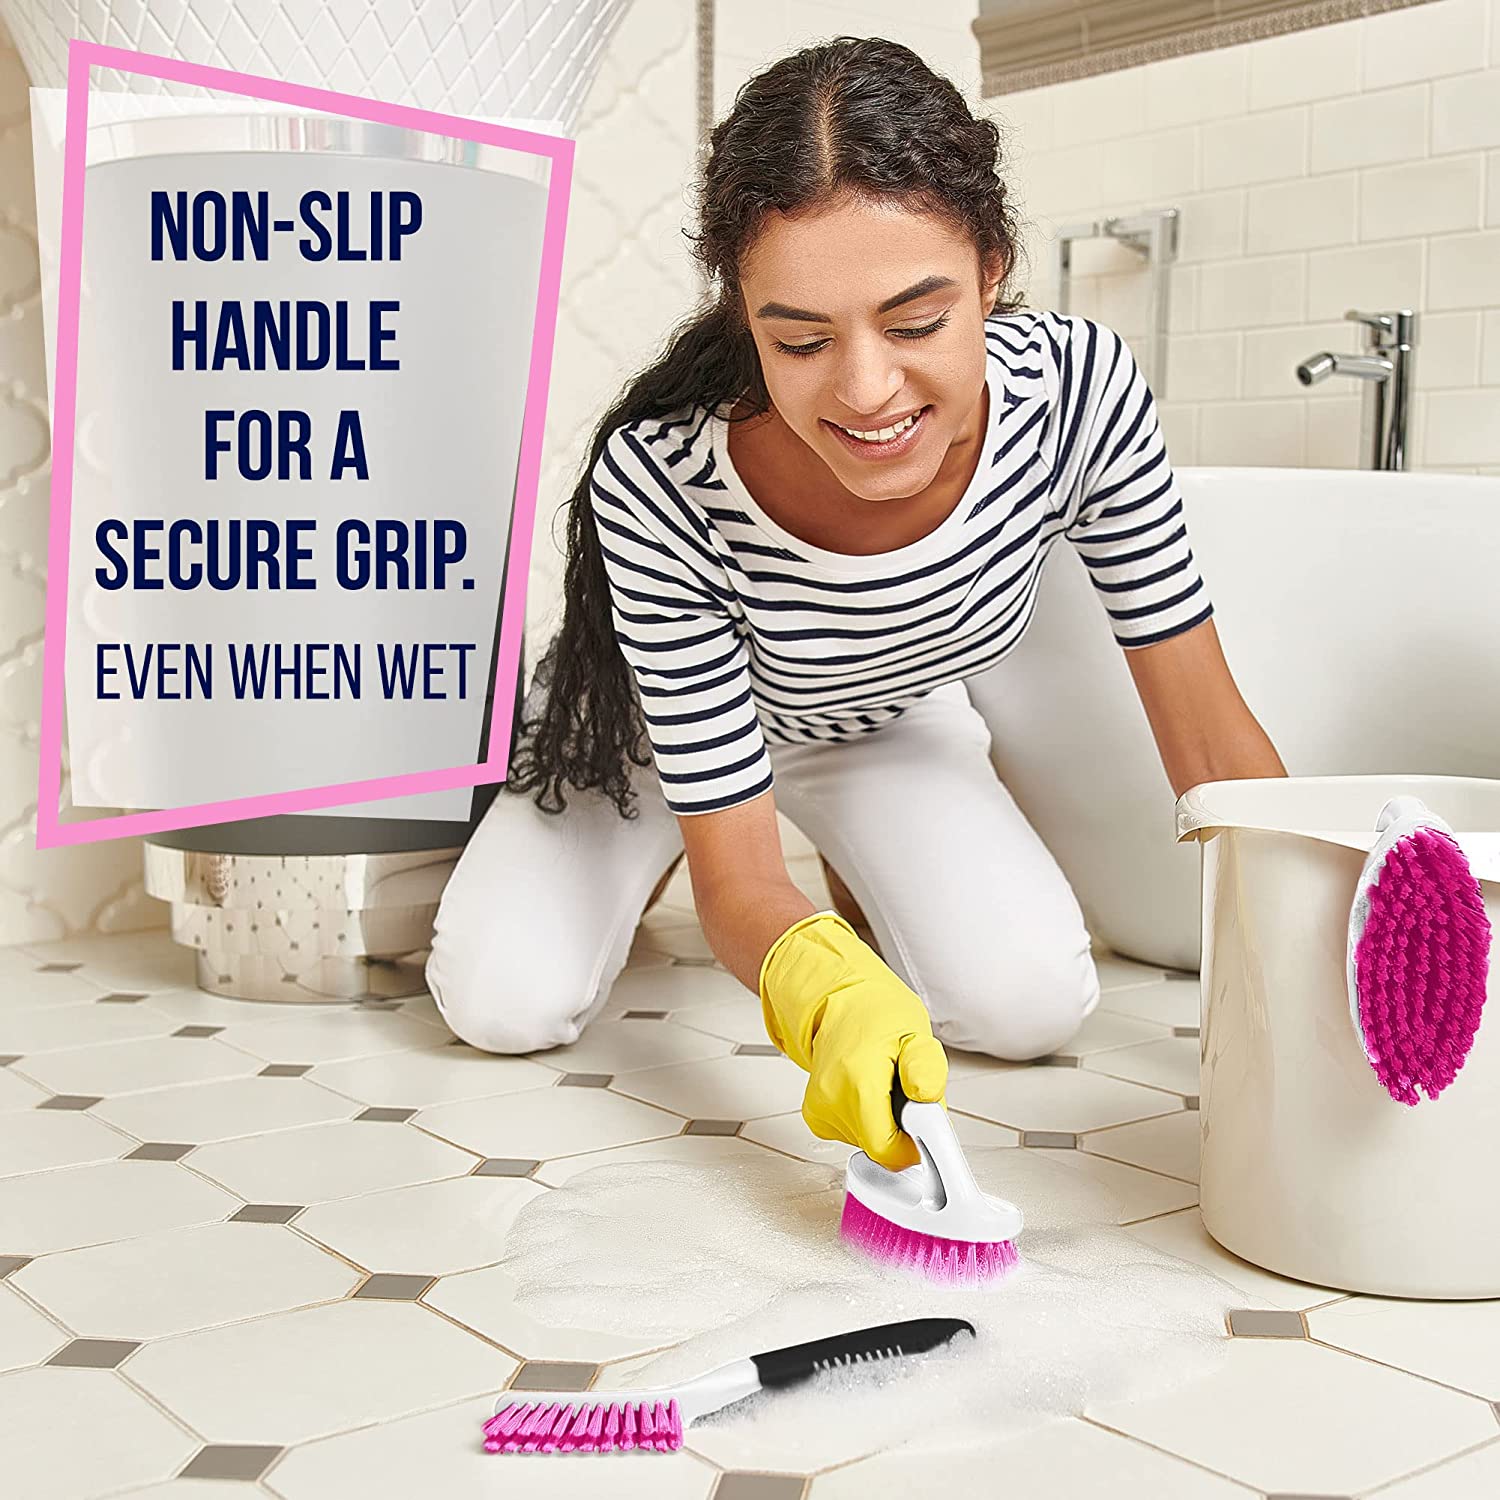 Stiff Bristles Grout Brush Scrubber Cleaning Bathroom Shower Grout